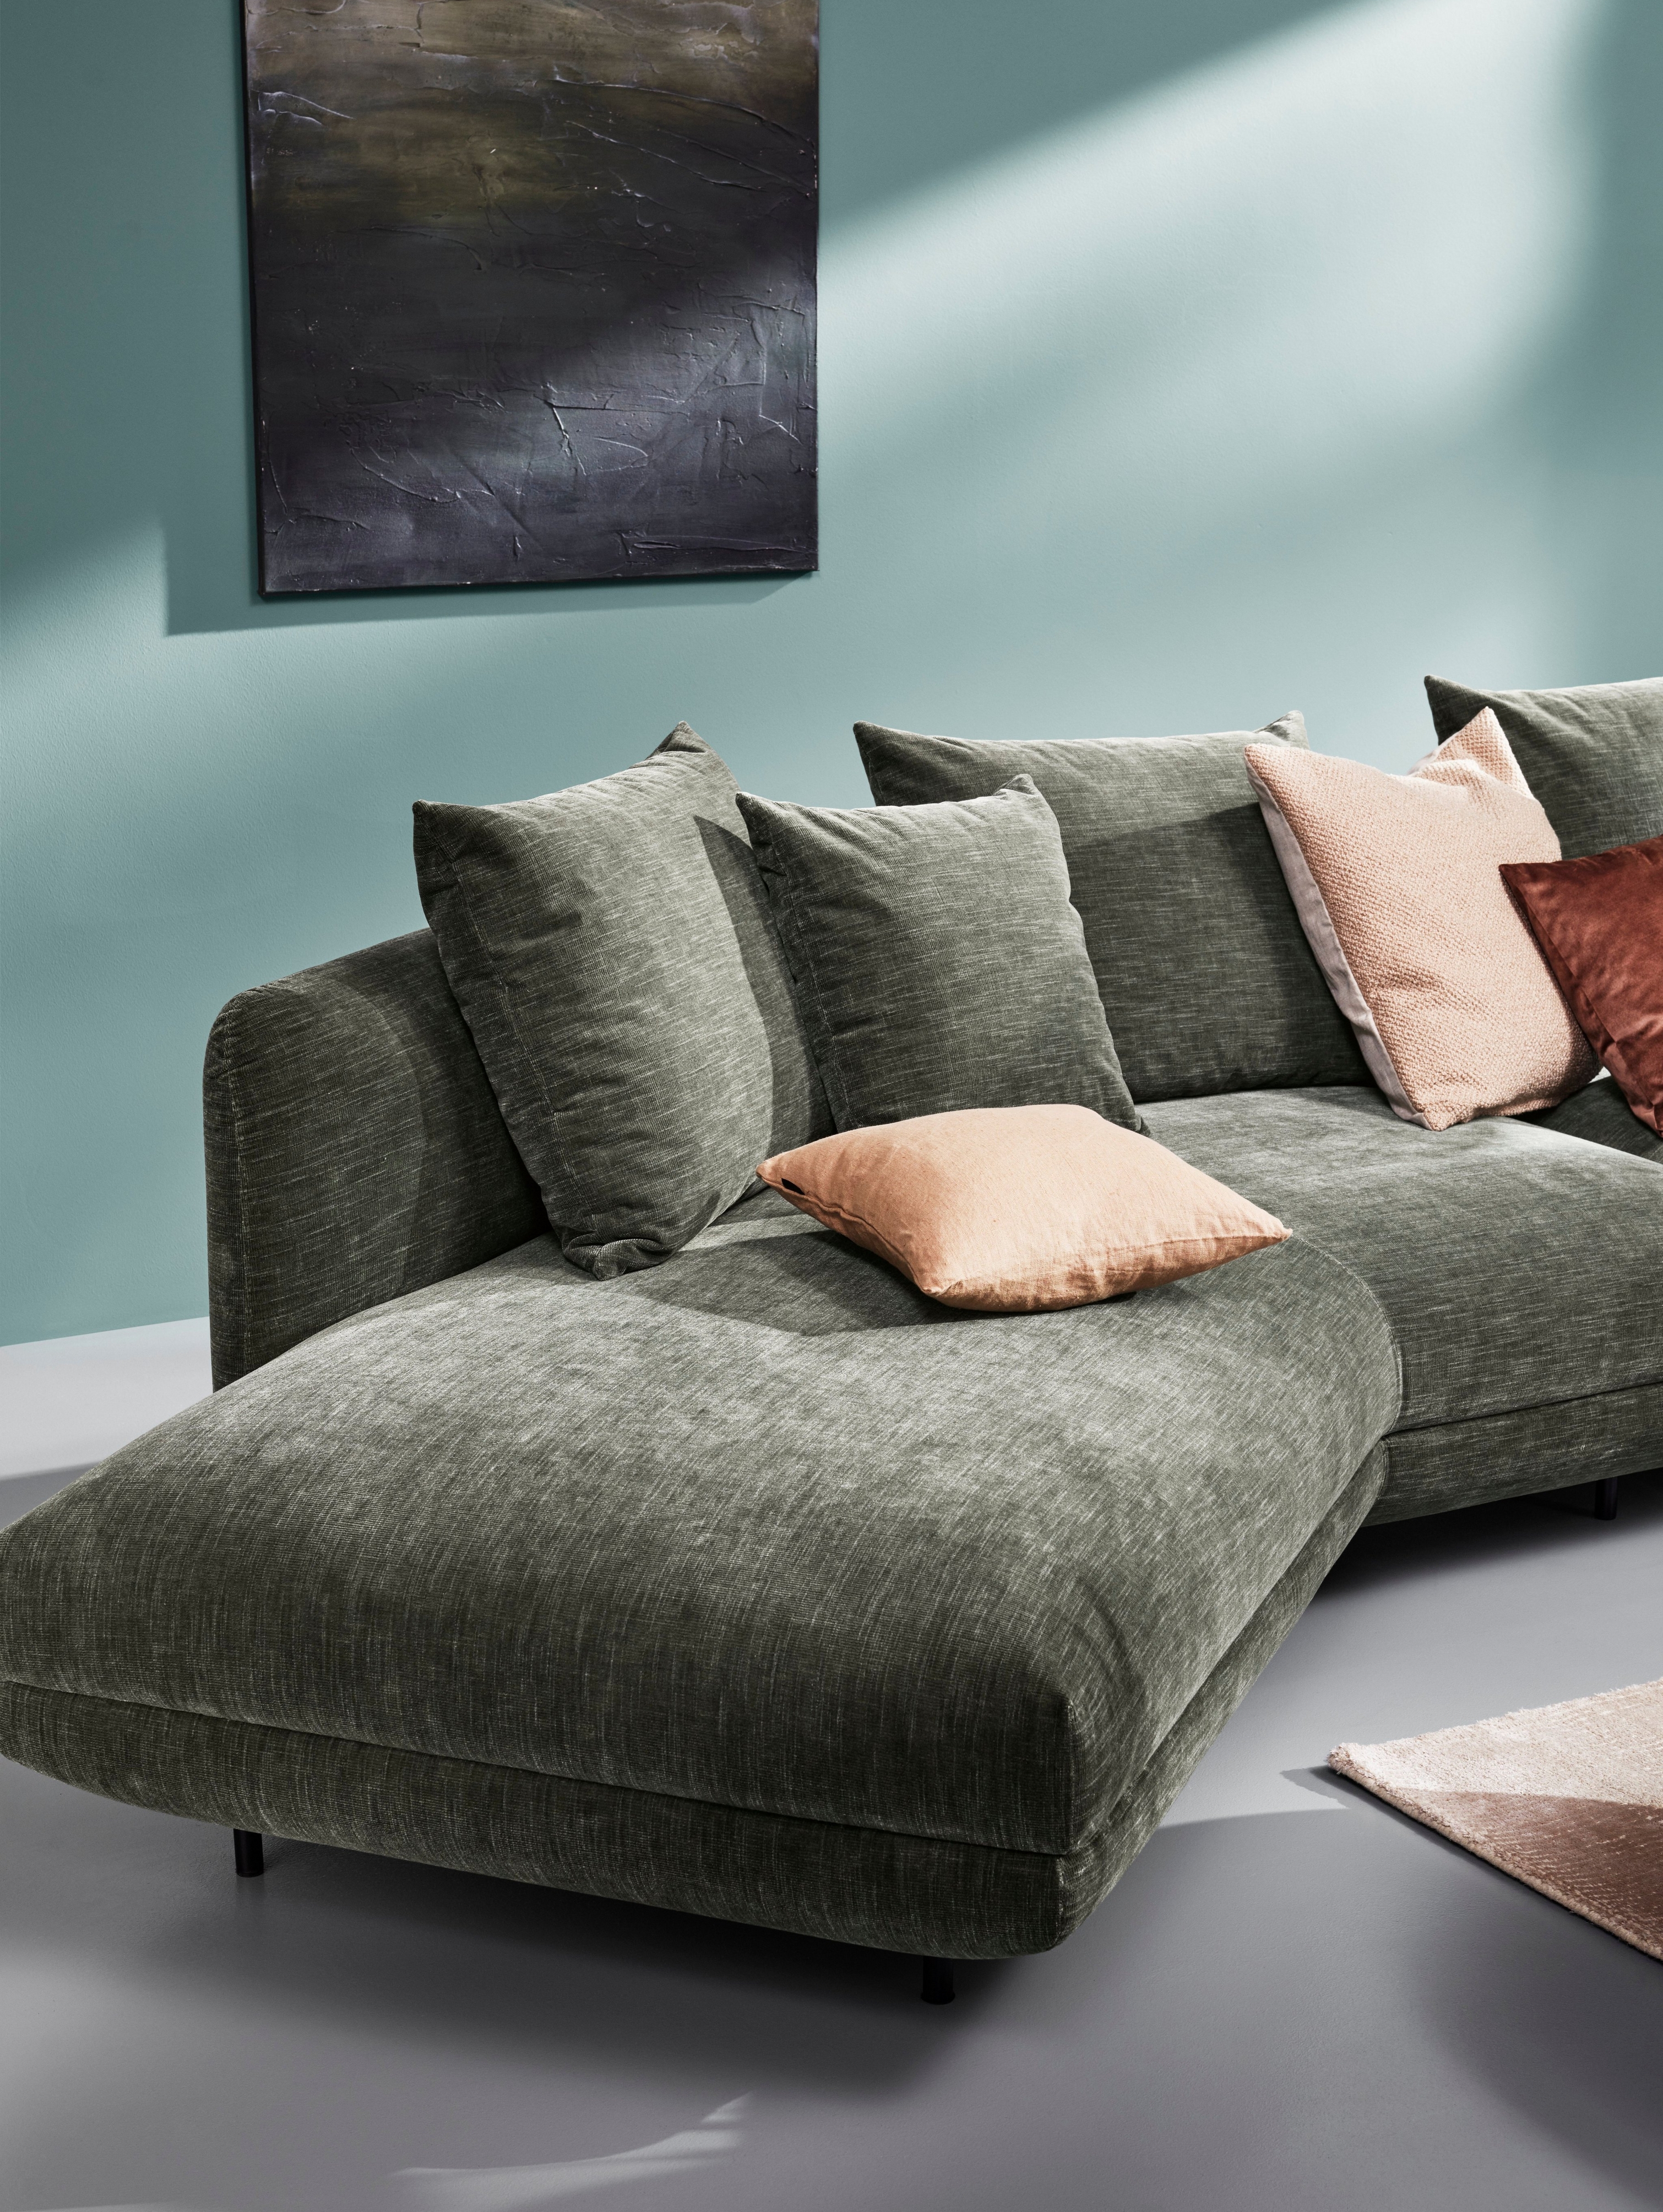 Green sectional Salamanca sofa with pillows against a teal wall with abstract art.